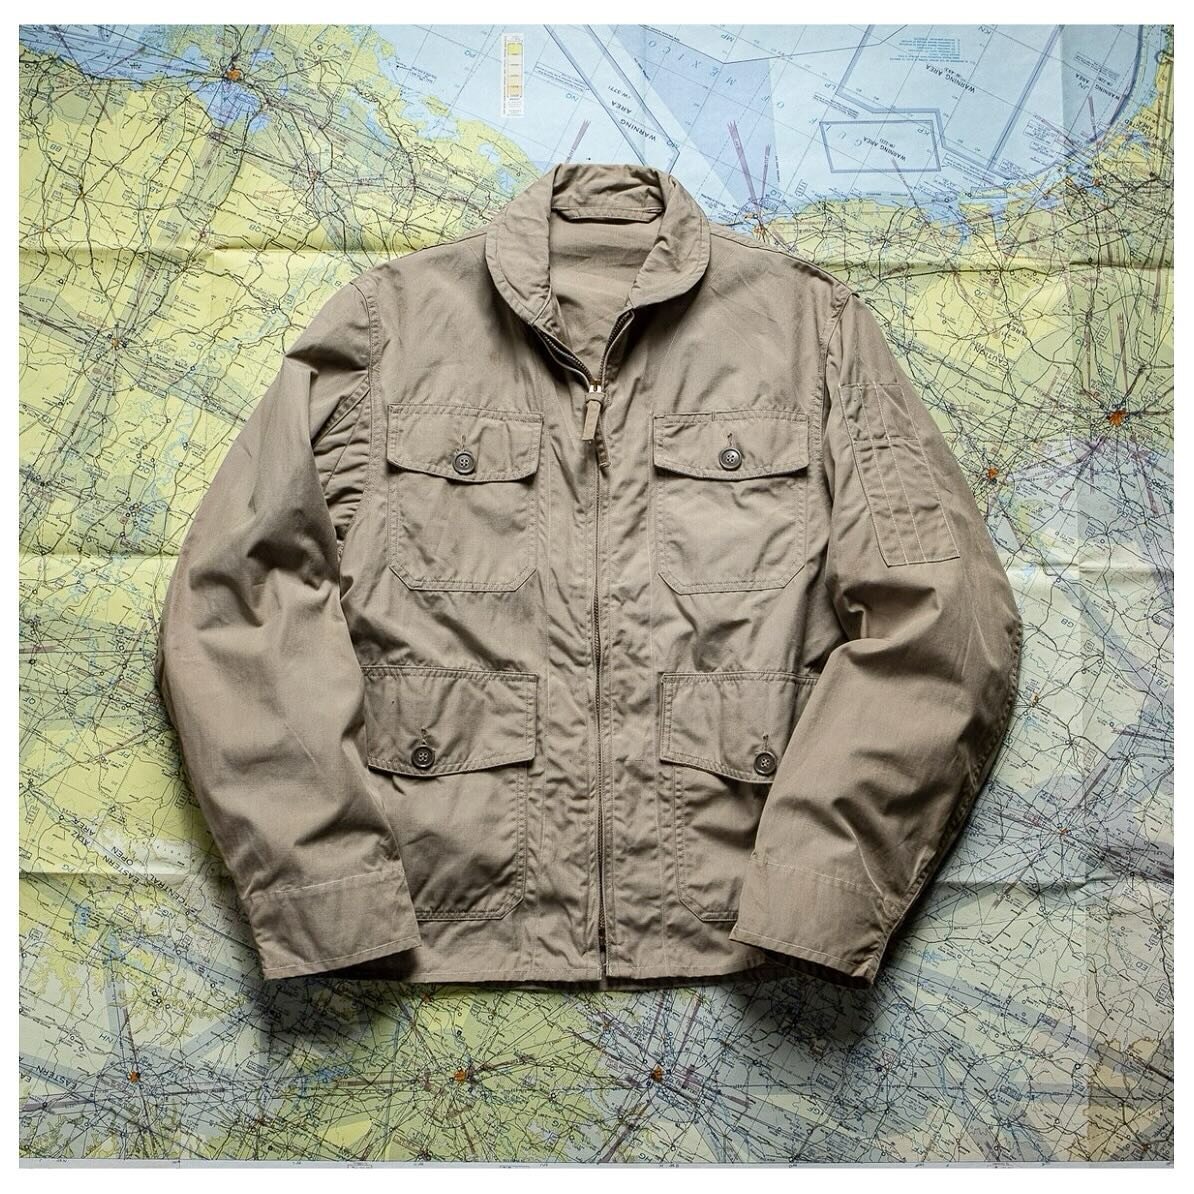 For Sale. Some new pieces have been added to the website including this incredible deadstock US Navy AN-J-2 Summer Lightweight Flight Jacket developed very late WW2 and used during the late 40&rsquo;s/ early 50&rsquo;s. 

Available now at Saundersmil